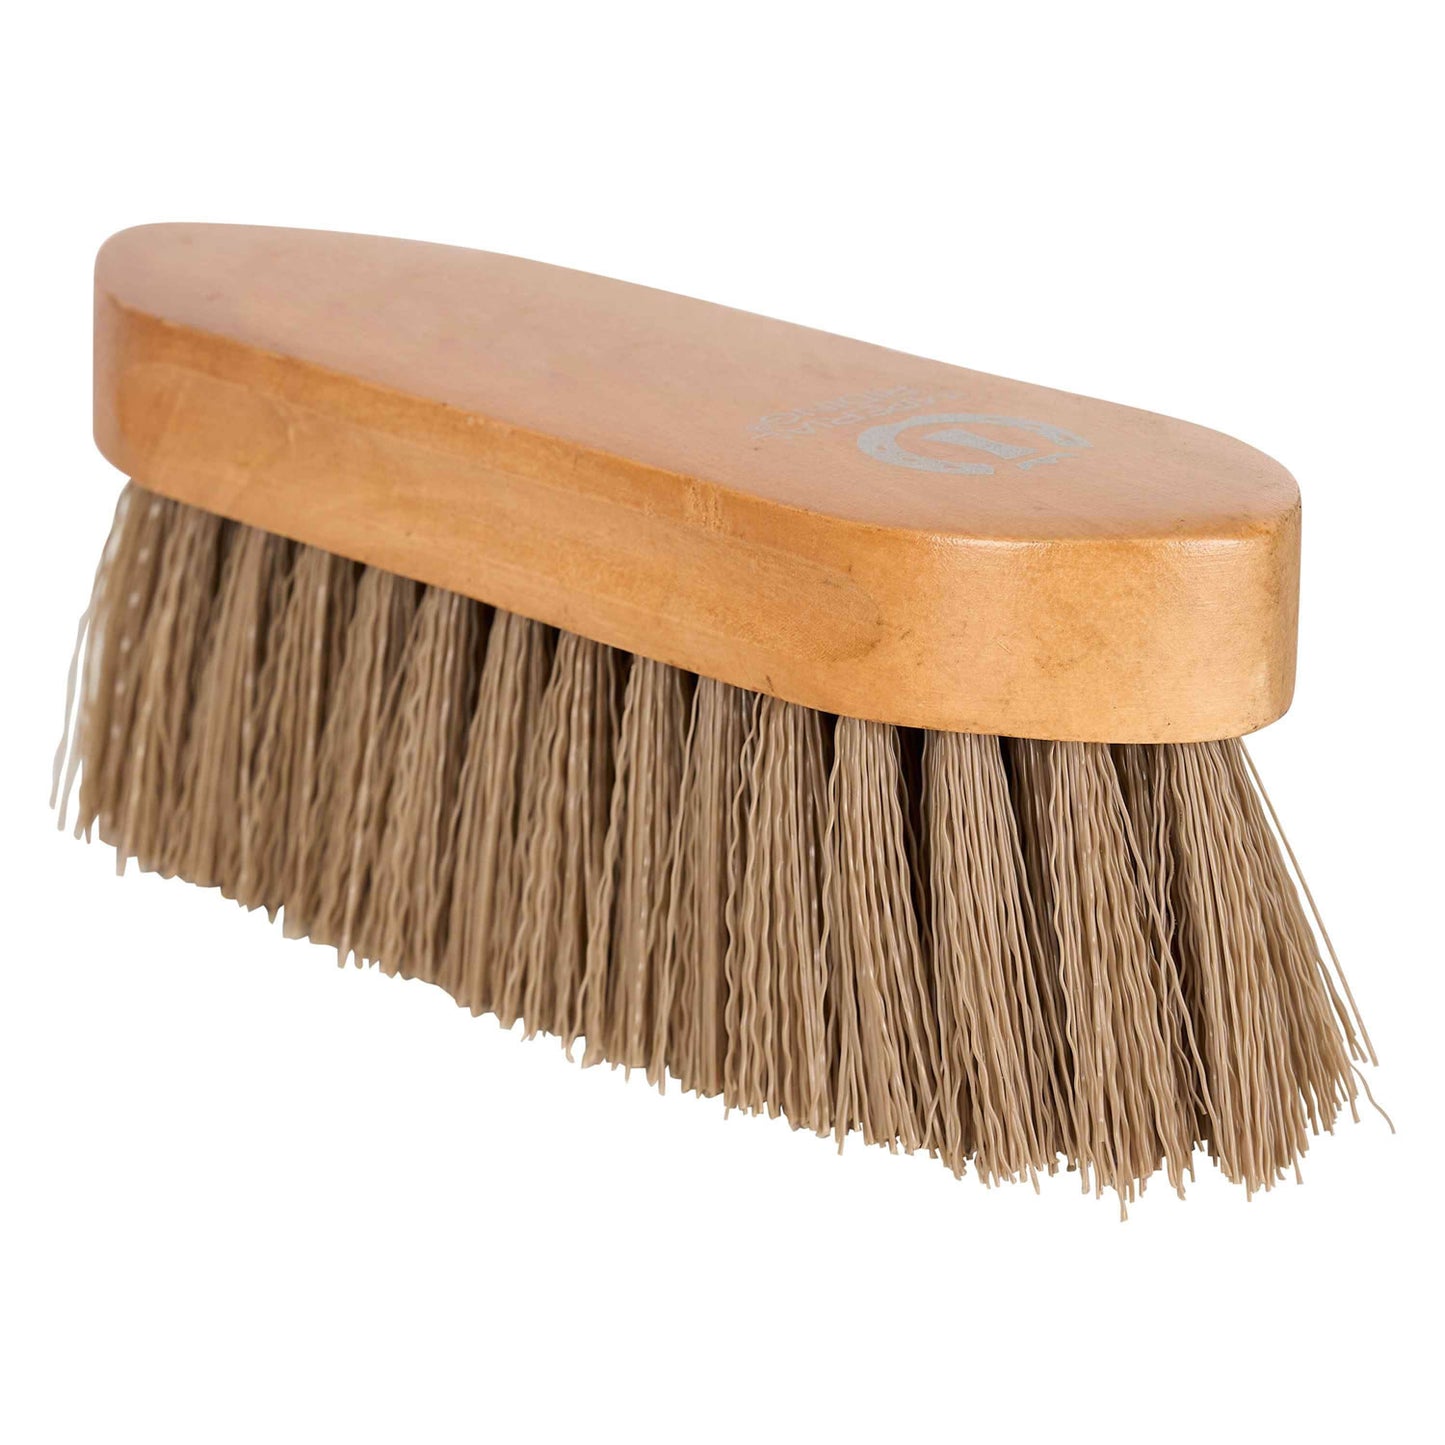 IMPERIAL RIDING DANDY BRUSH HARD WITH WOODEN BACK